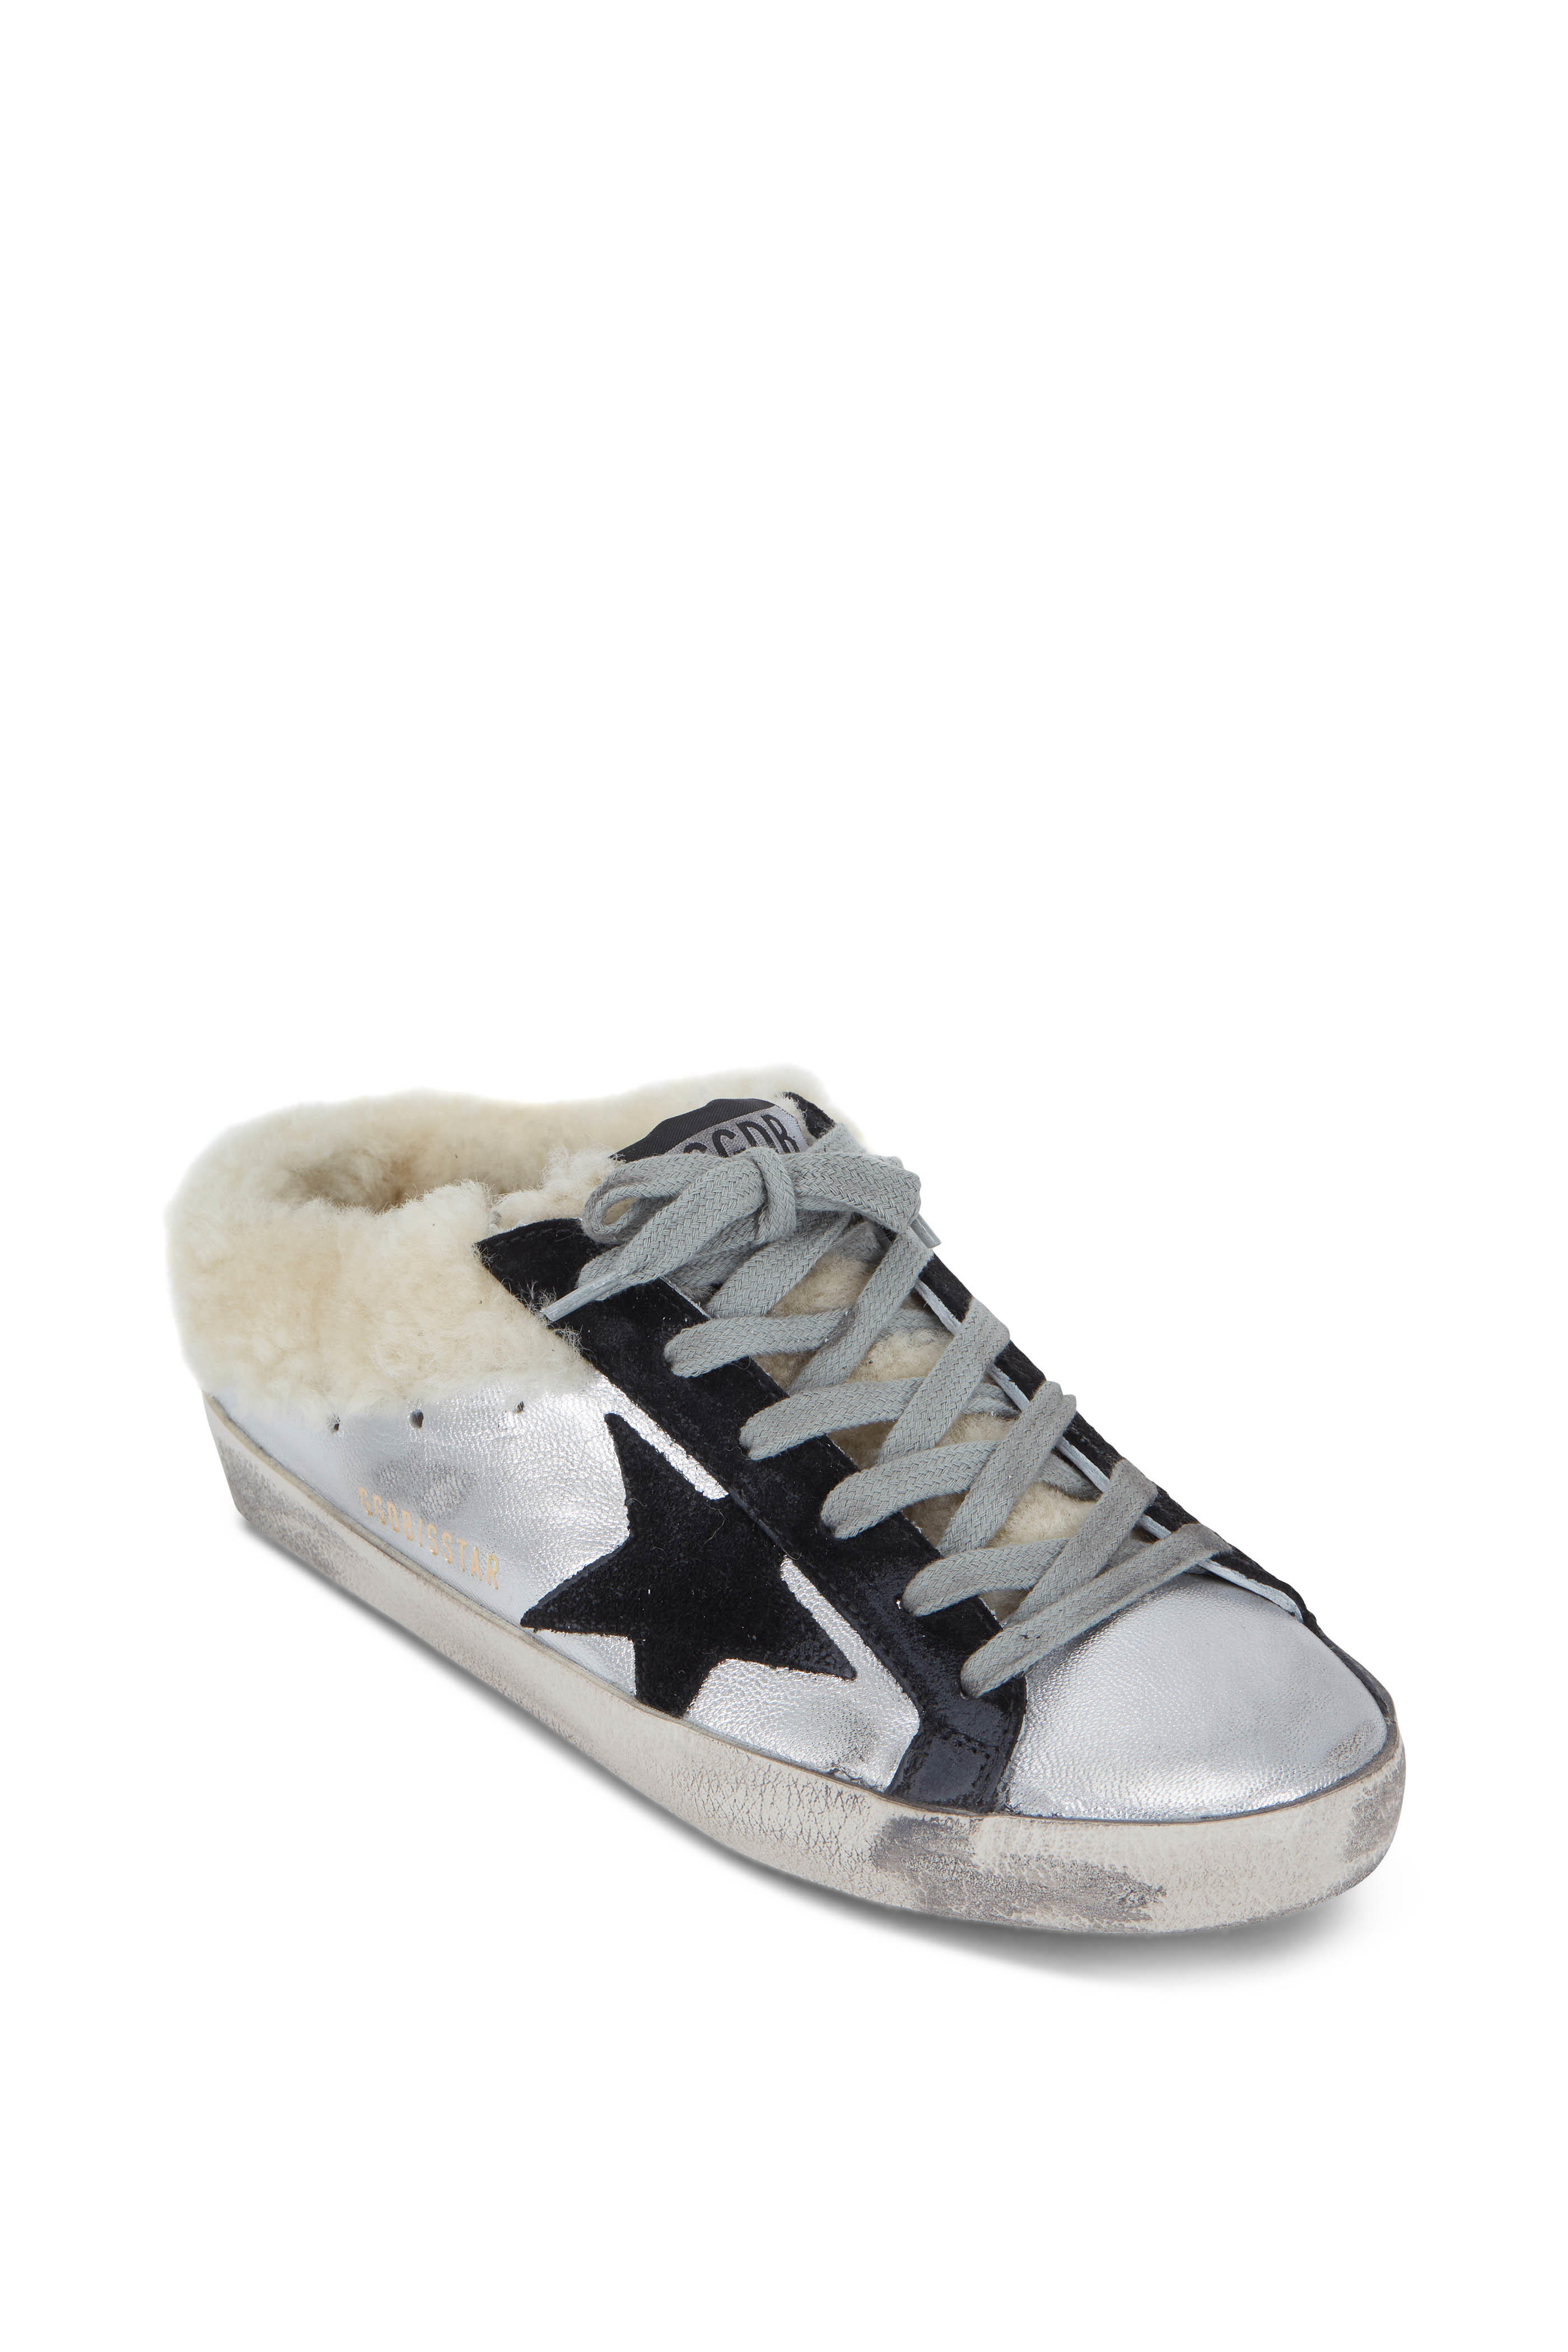 golden goose shearling lined sneakers